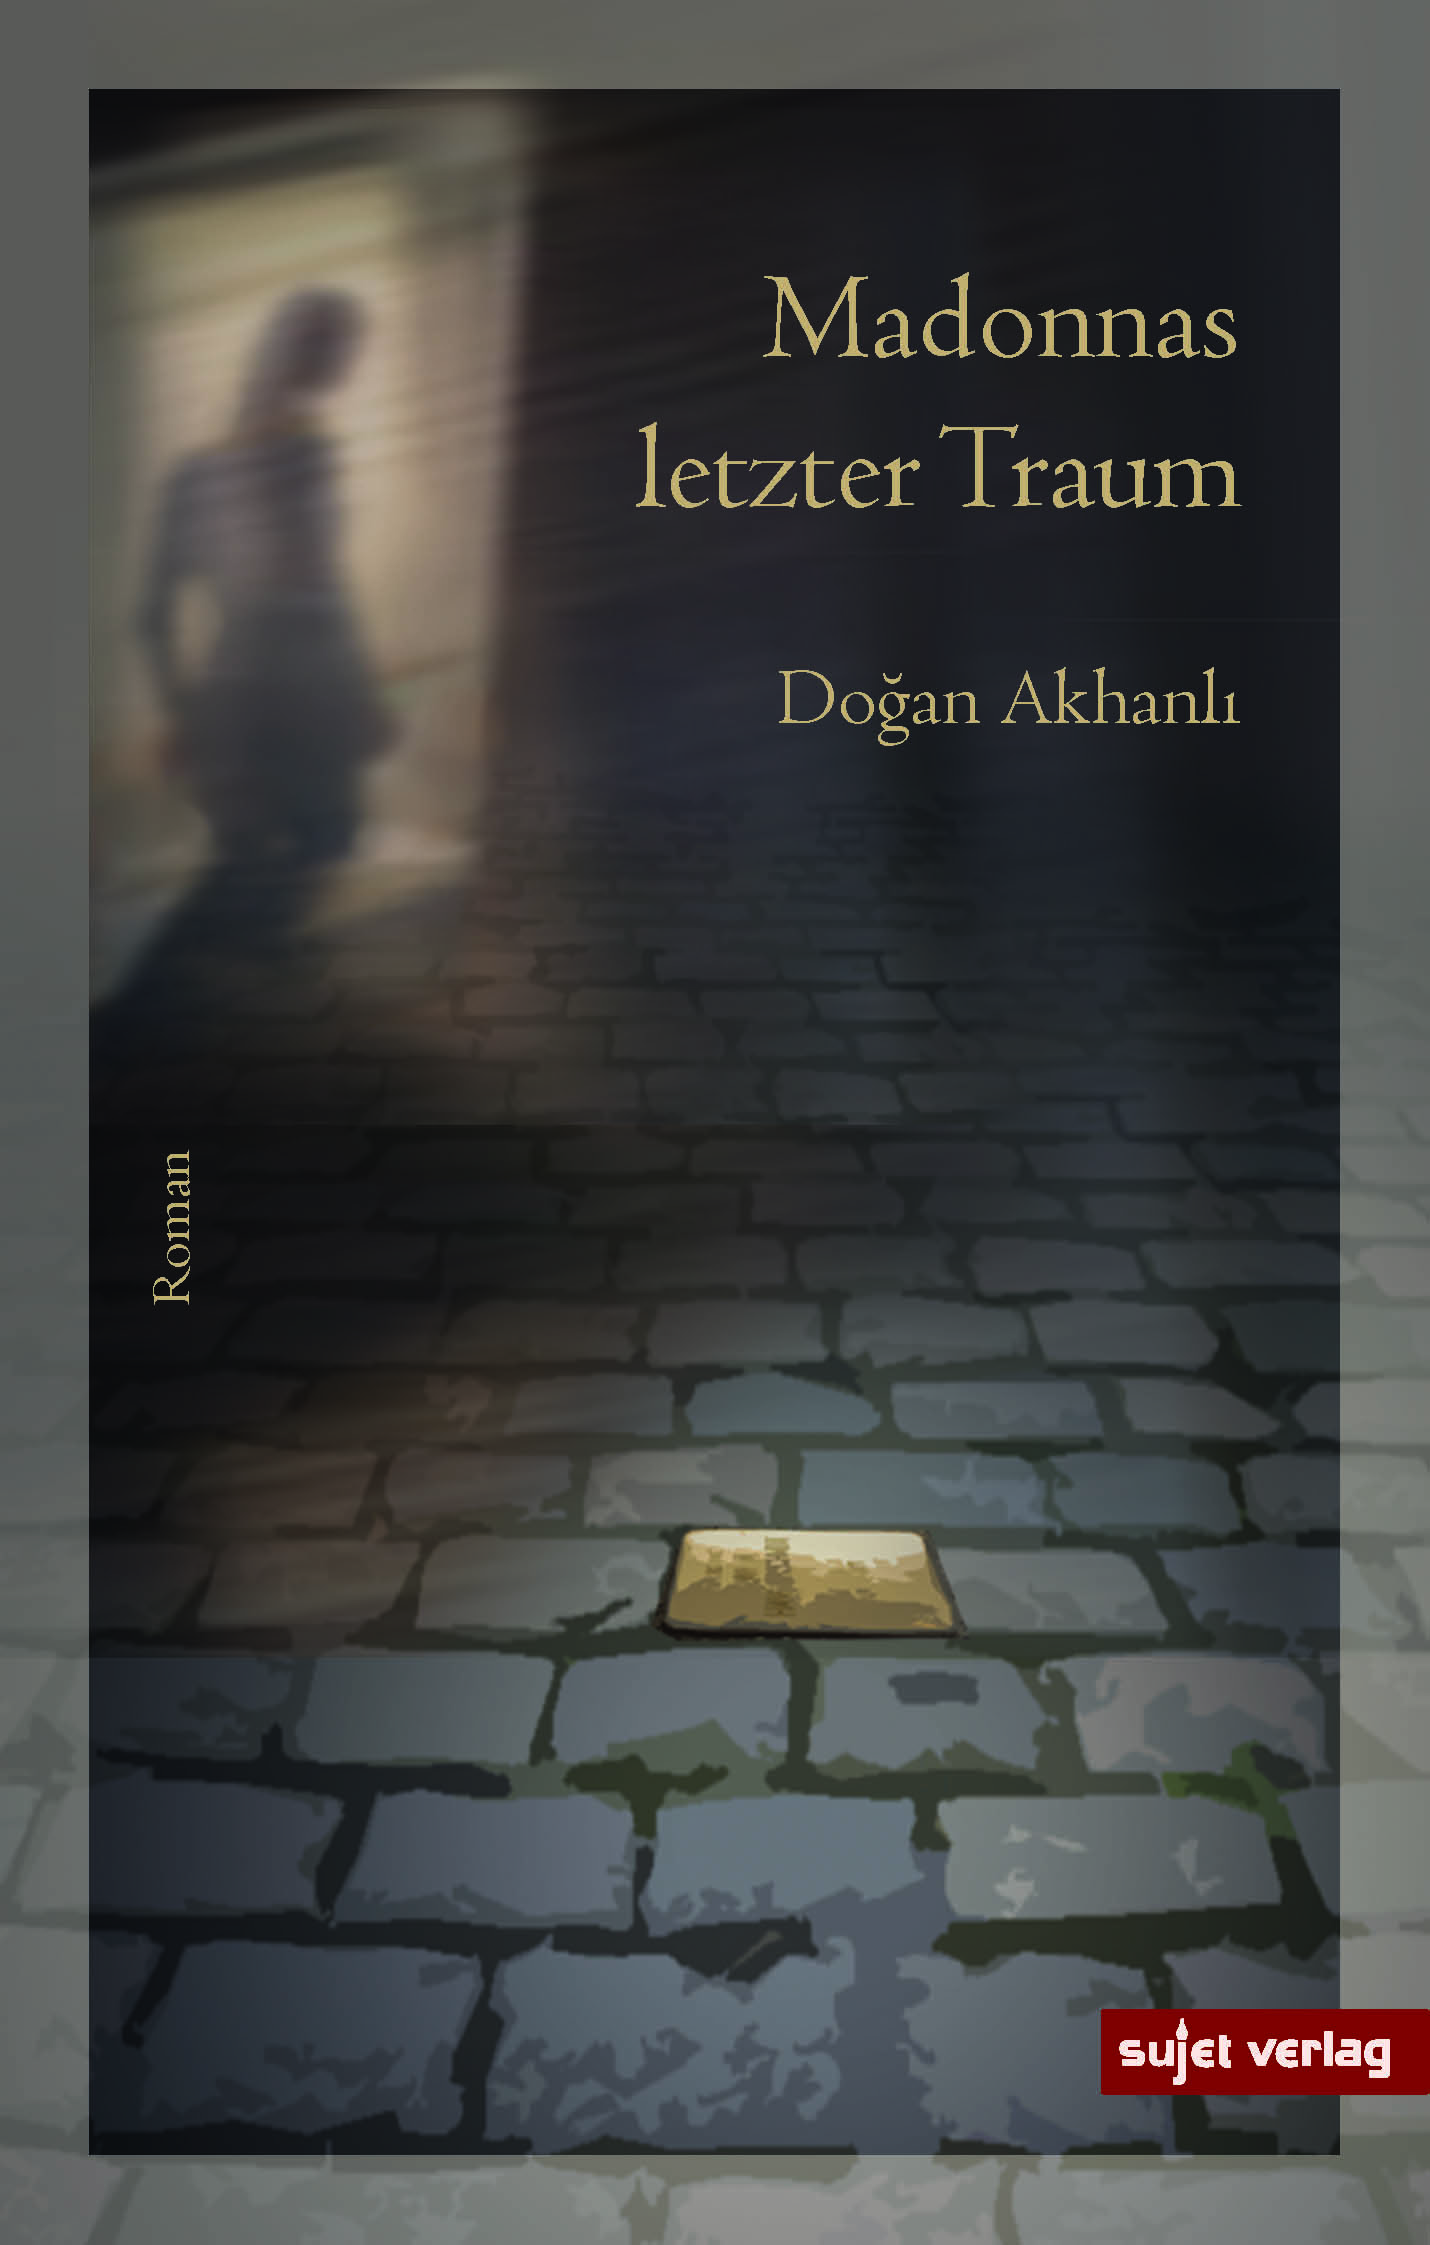 Cover of Dogan Akhanli's "Madonnas letzter Traum" – Madonna's Last Dream (published in German by sujet) 